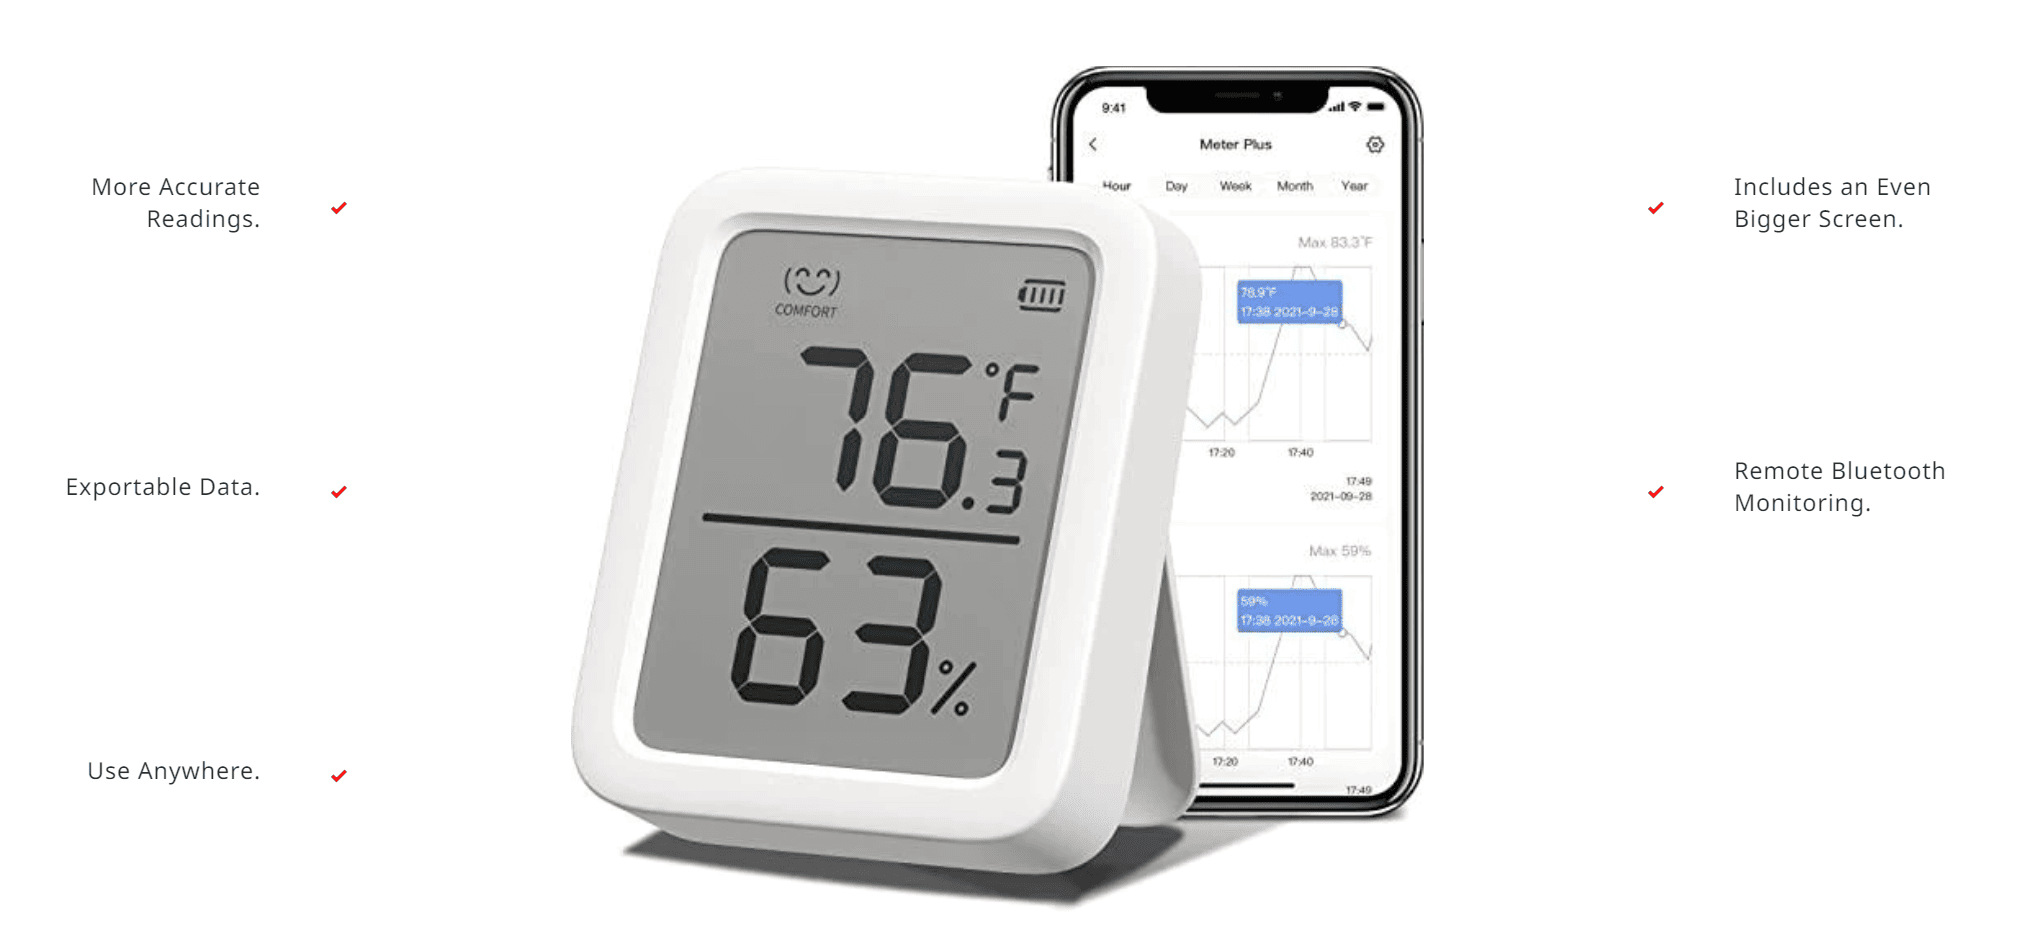 SwitchBot Meter Plus Review – Another fantastic affordable smart thermometer hygrometer sensor